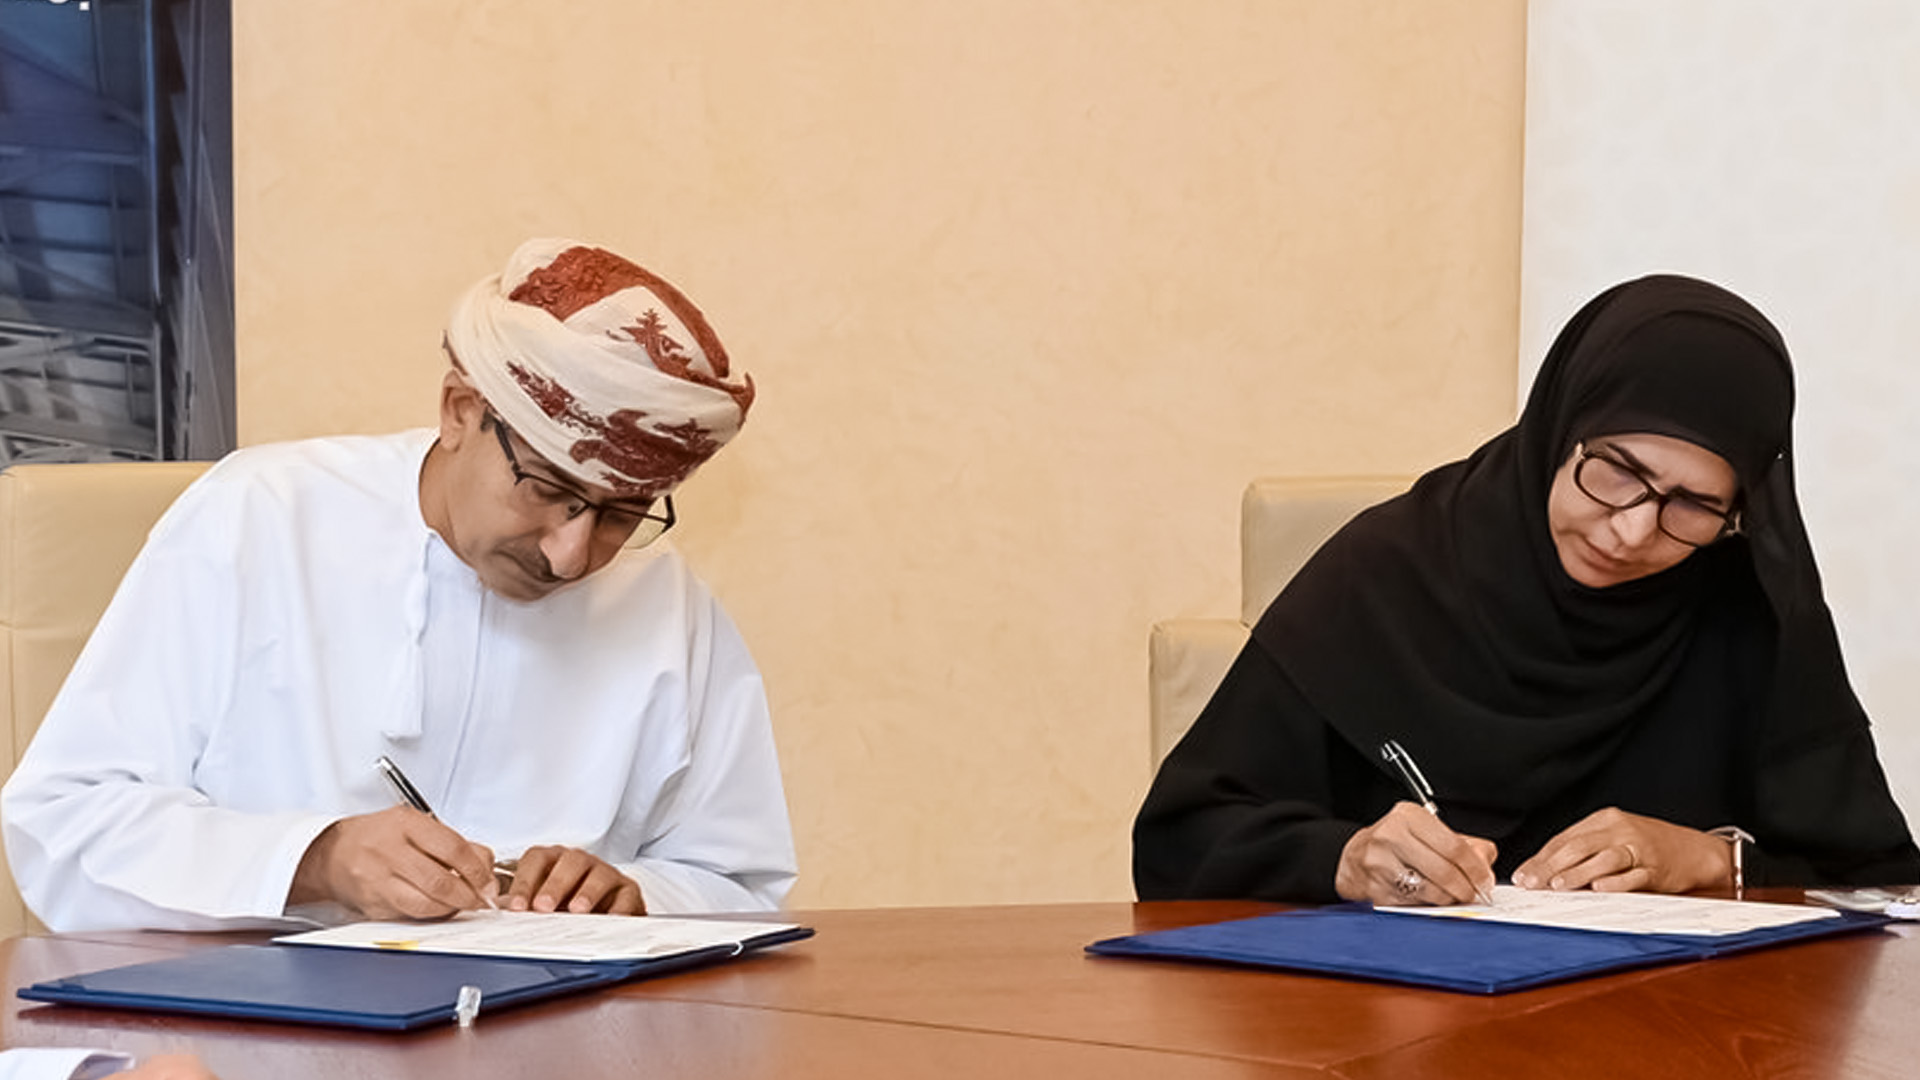 Oman Ministry of Higher Education inks agreement to develop Vocational Colleges